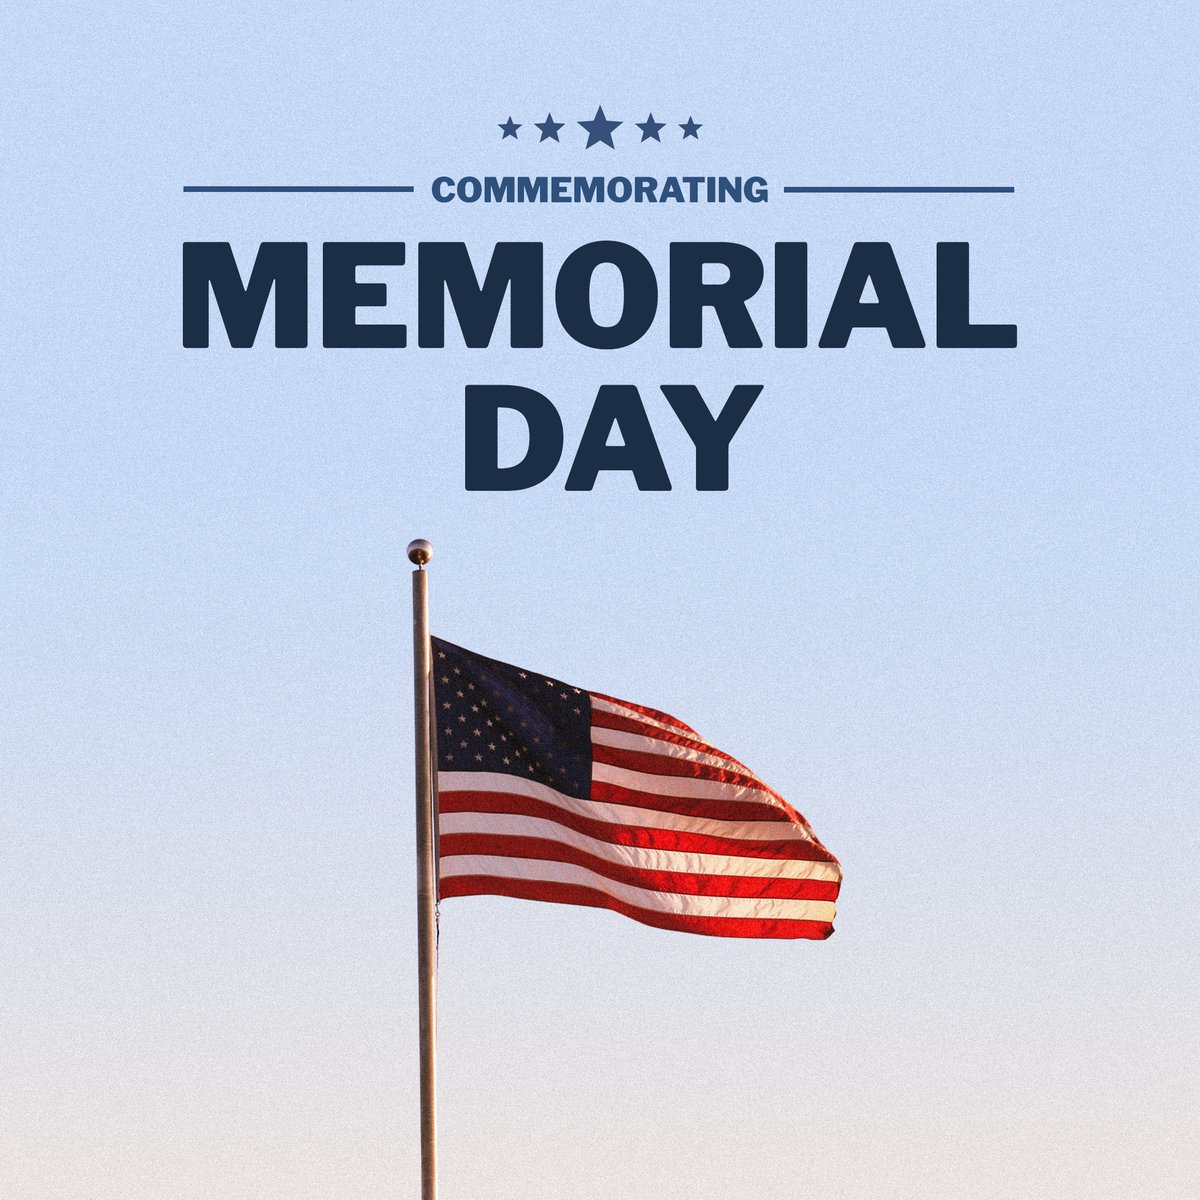 Today, we honor the brave men and women in our armed forces who lost their lives while serving our great nation. 🇺🇸🇺🇸🇺🇸 We are all forever indebted and deeply grateful for their sacrifice.